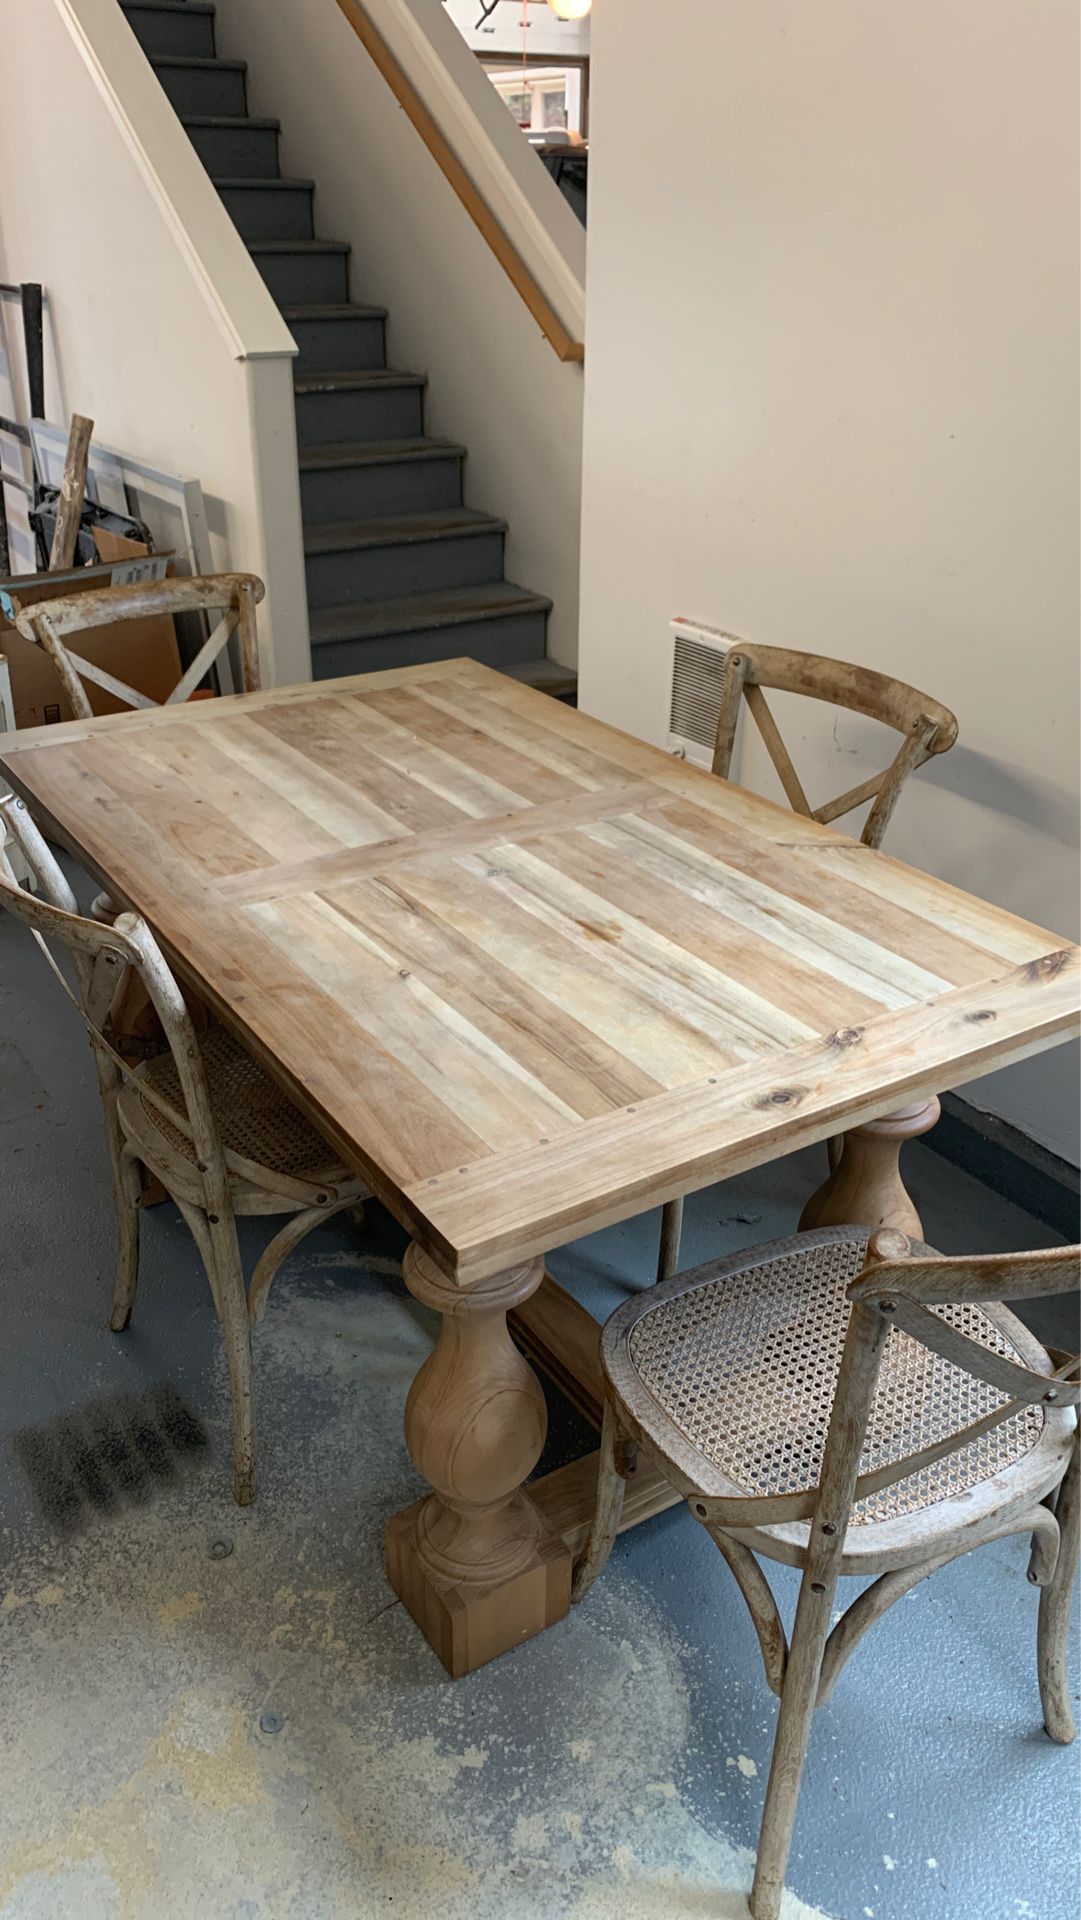 Dining table 36” x 60” plus 4 chairs - all from restoration hardware